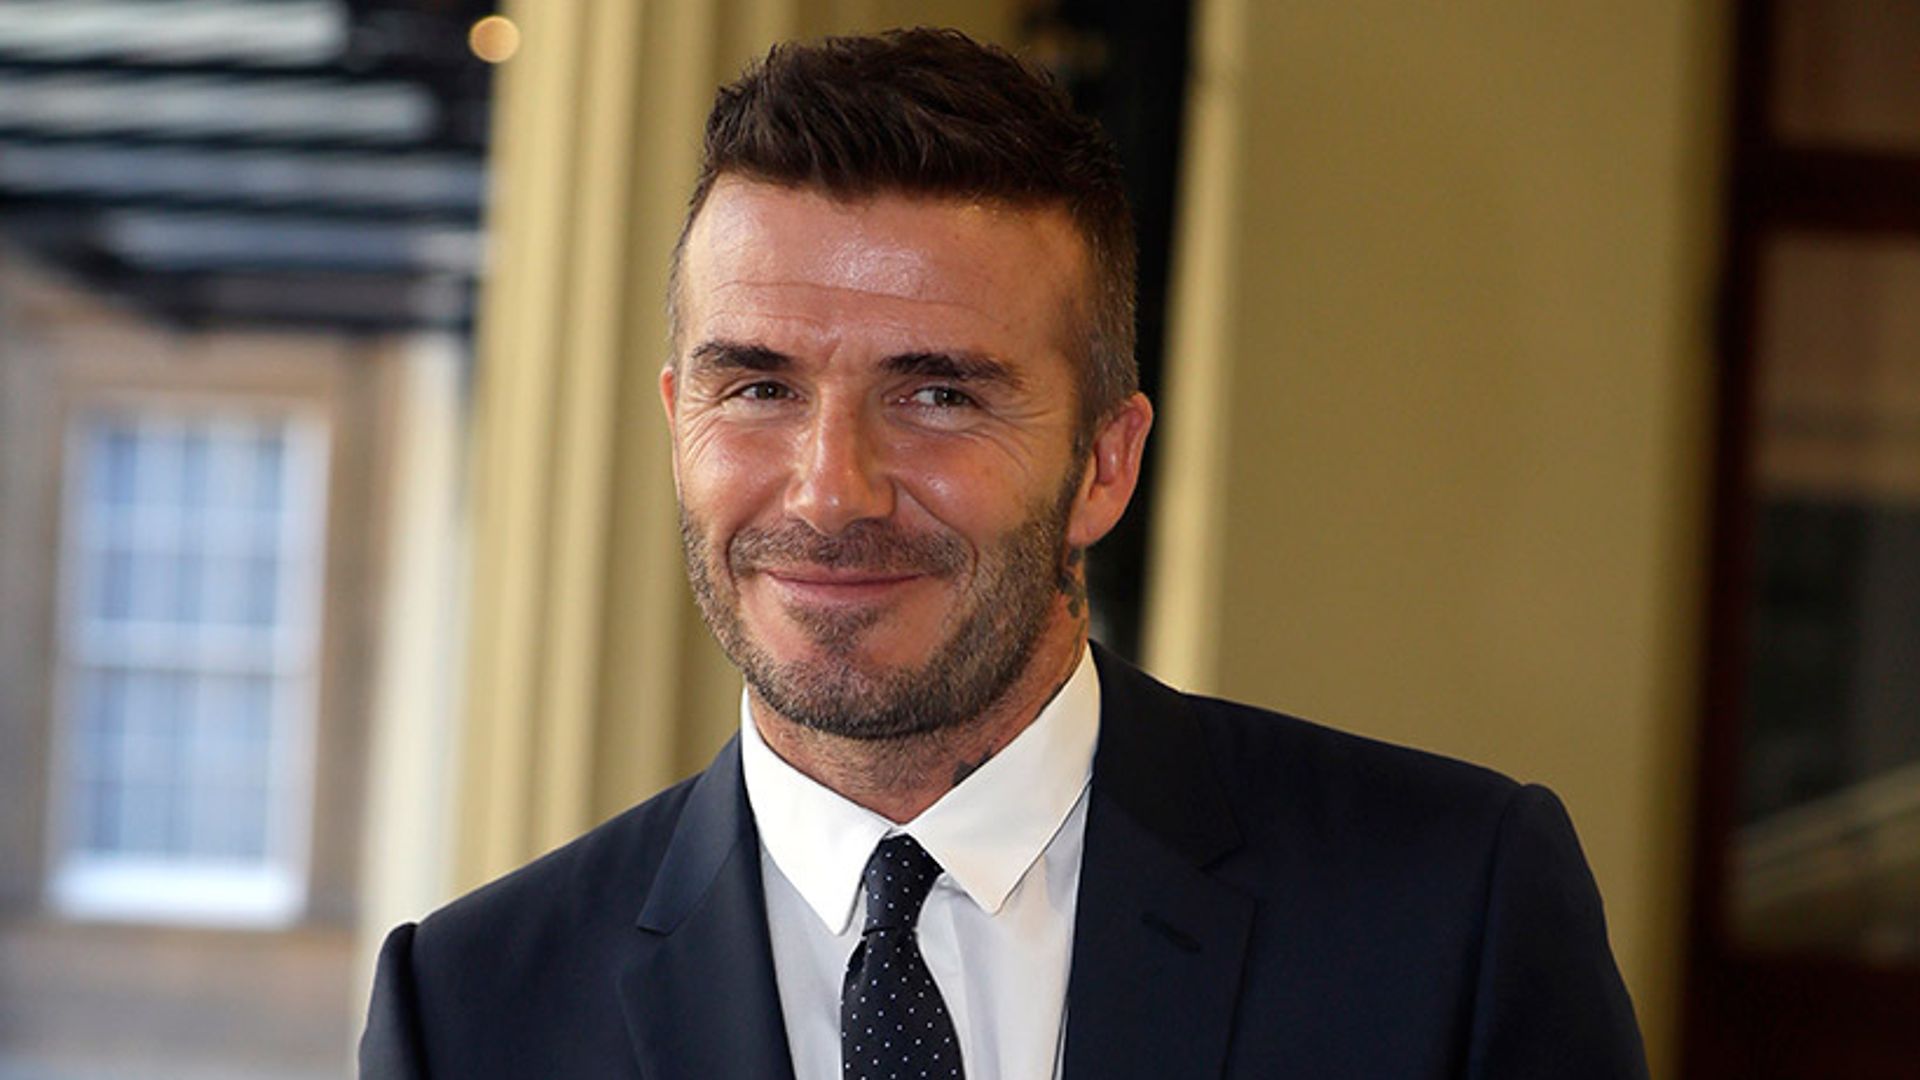 David Beckham Just Debuted A New Hairstyle And He Looks